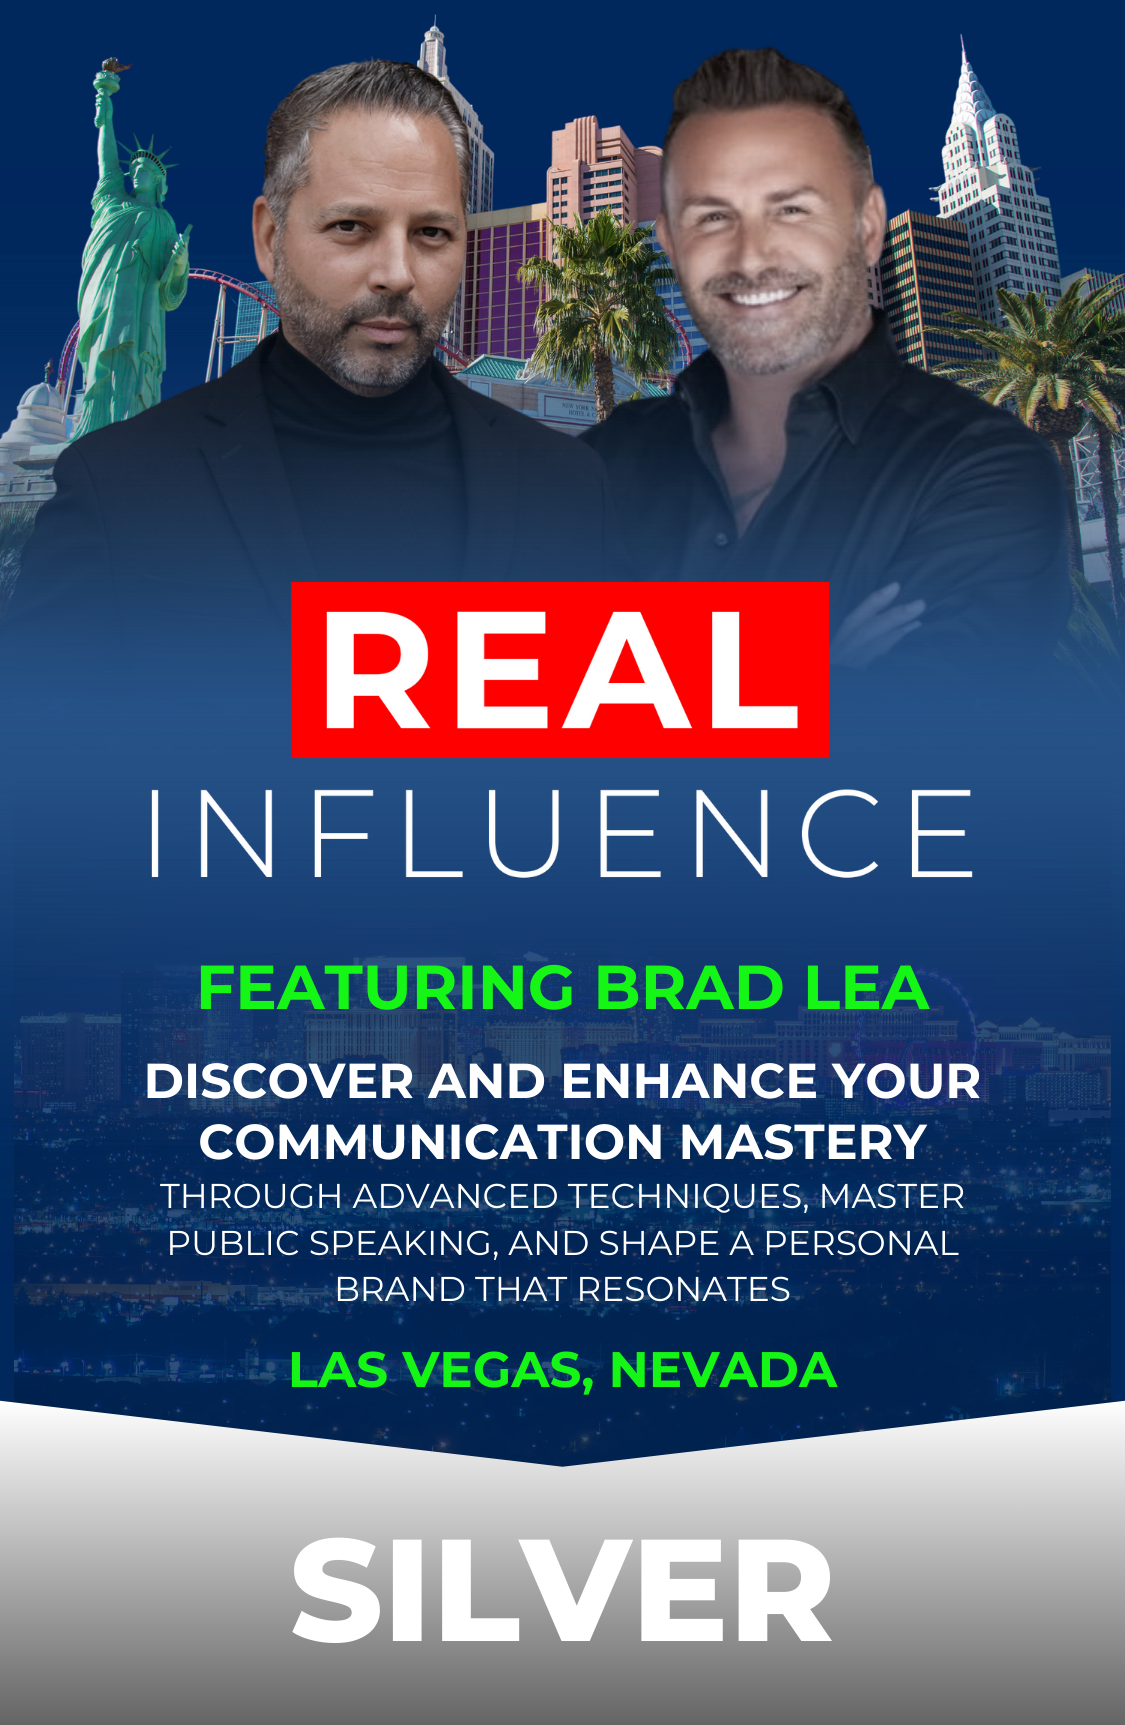 Real Influence – SILVER Package